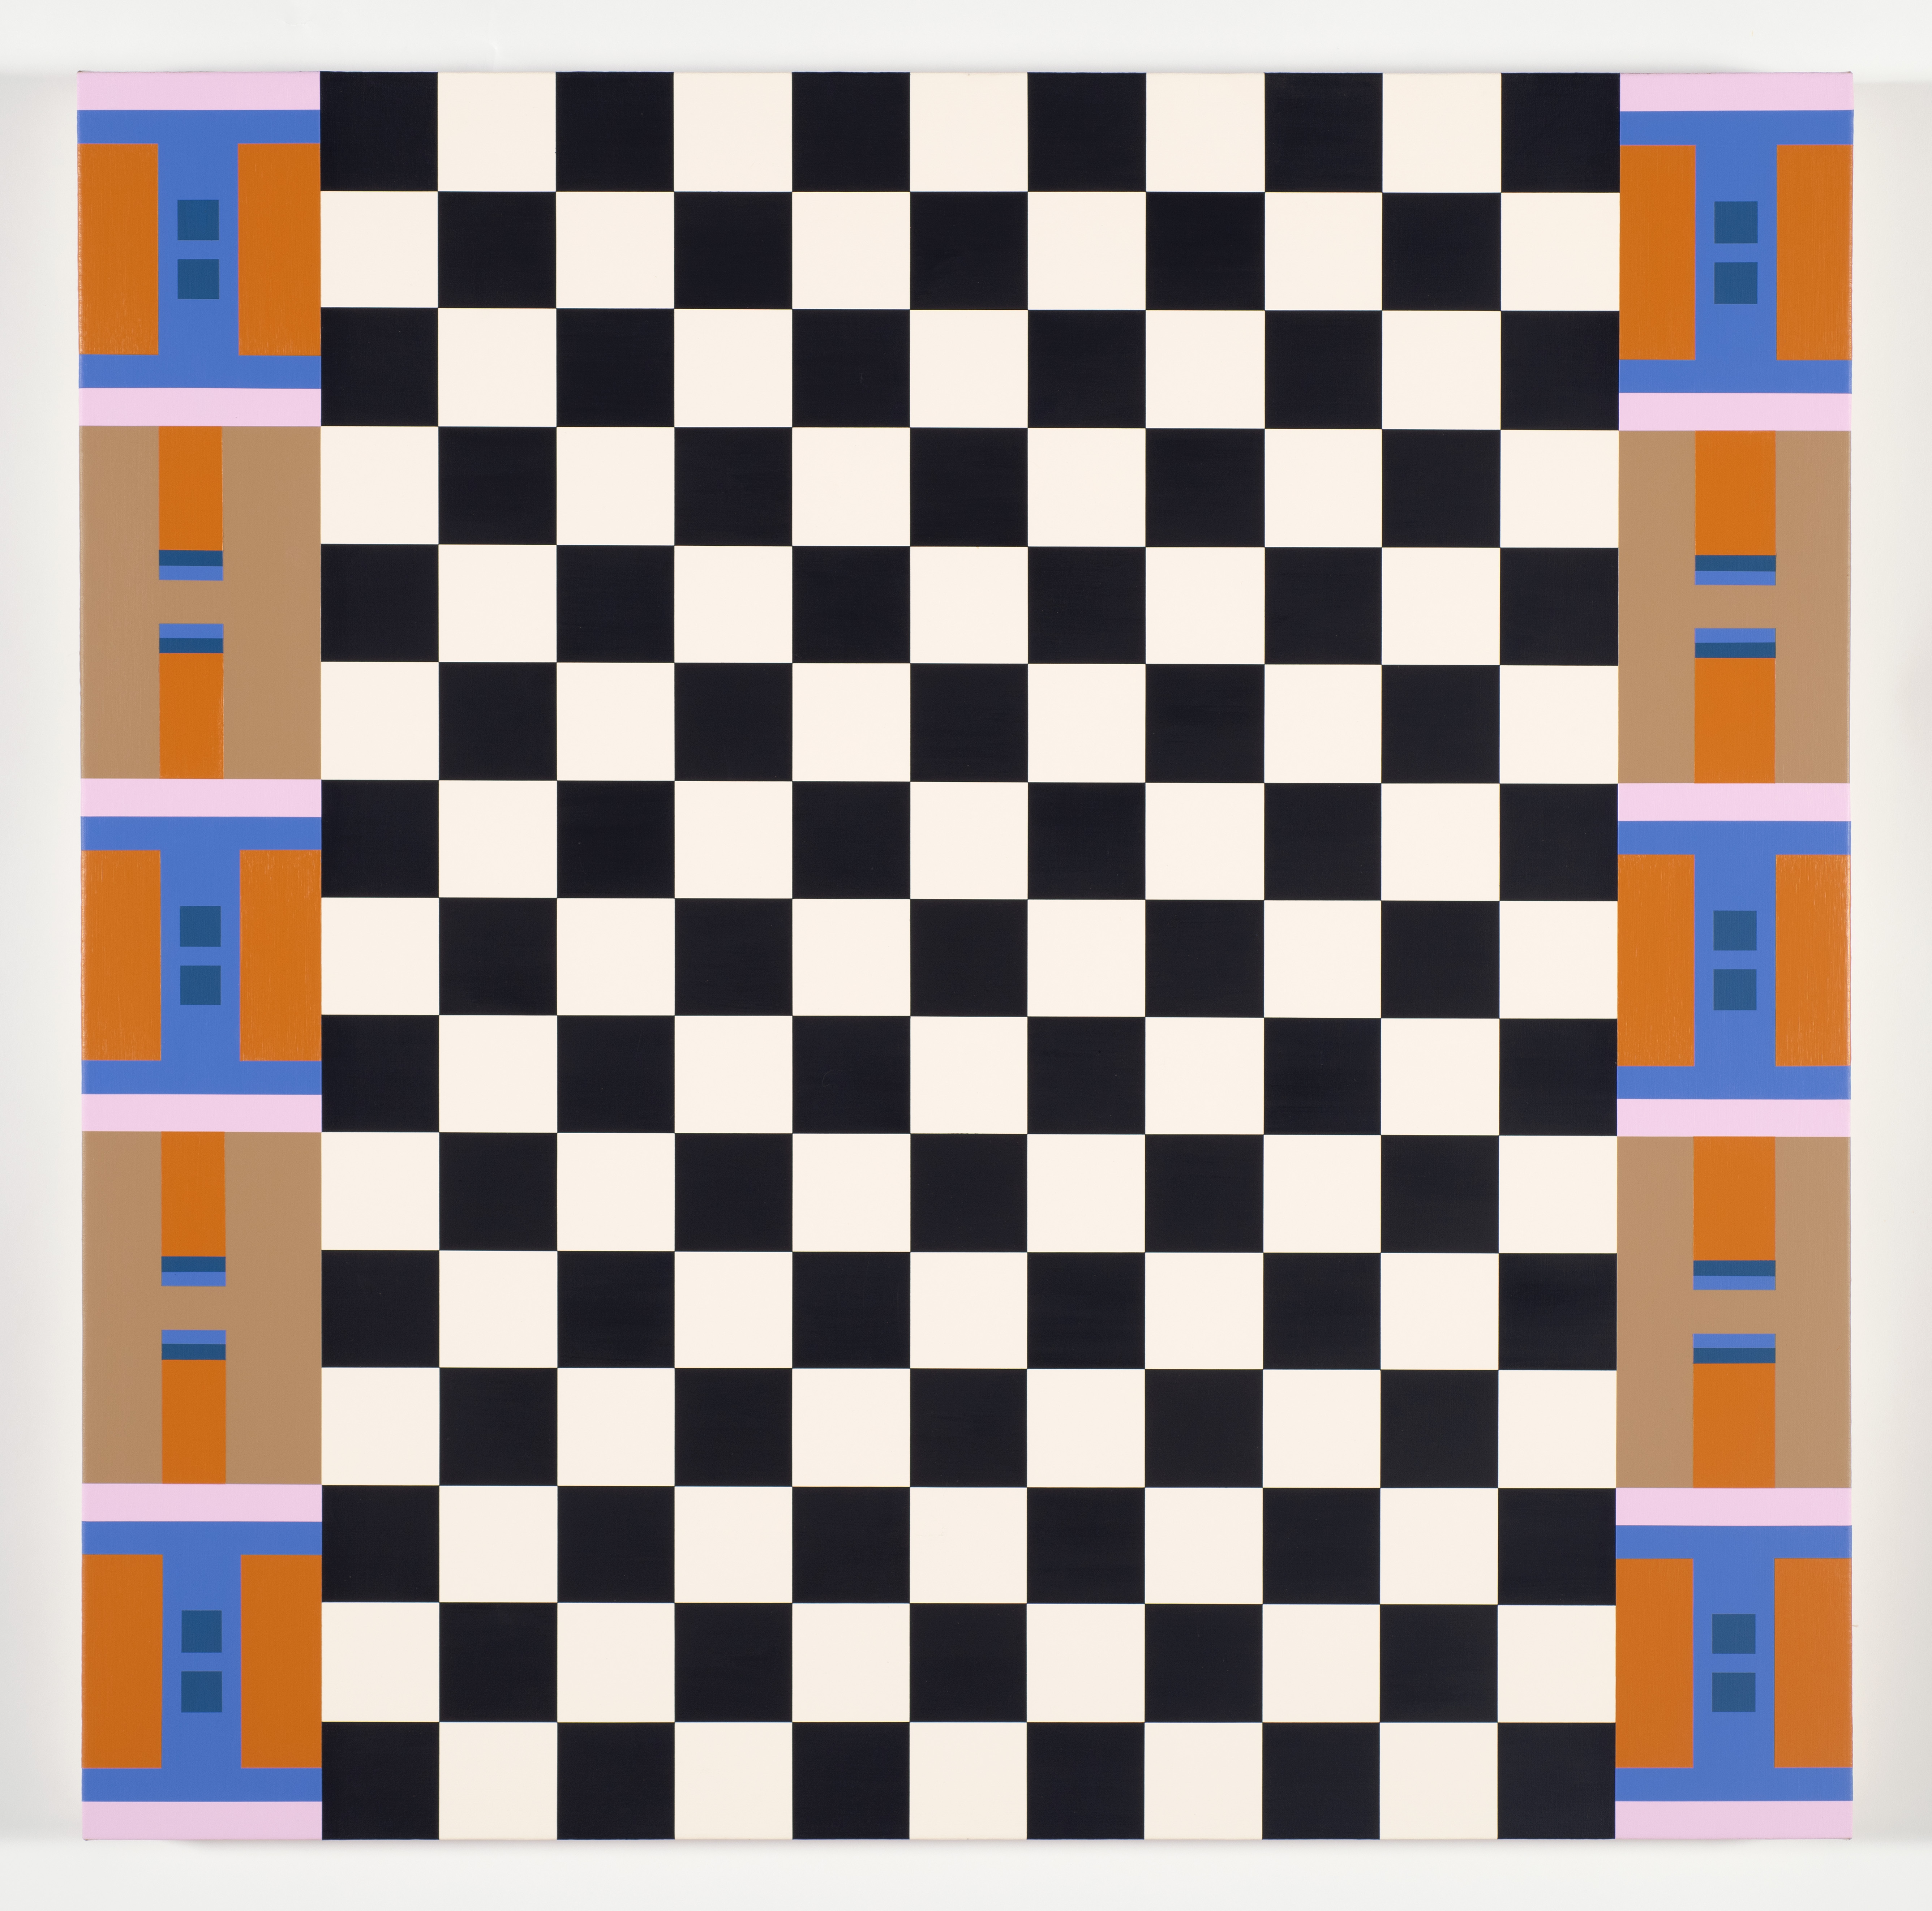 A black and white checkboard is painted on a white background. It is bordered on the side with blue, orange and tan abstract patterns.